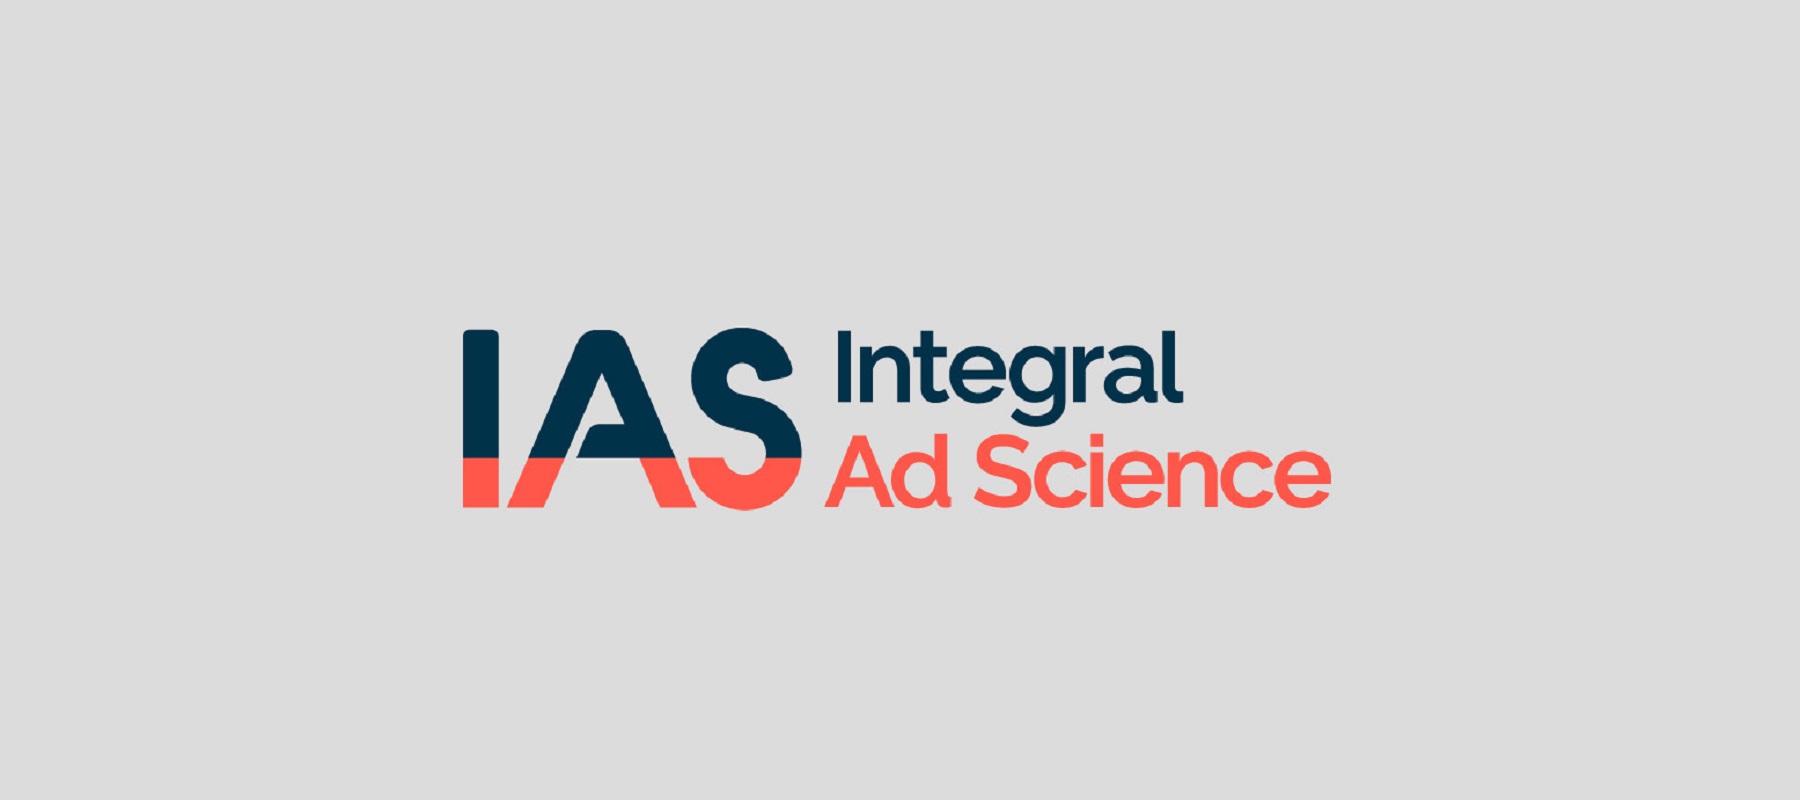 IAS collaborates with X to provide pre-bid brand safety and suitability